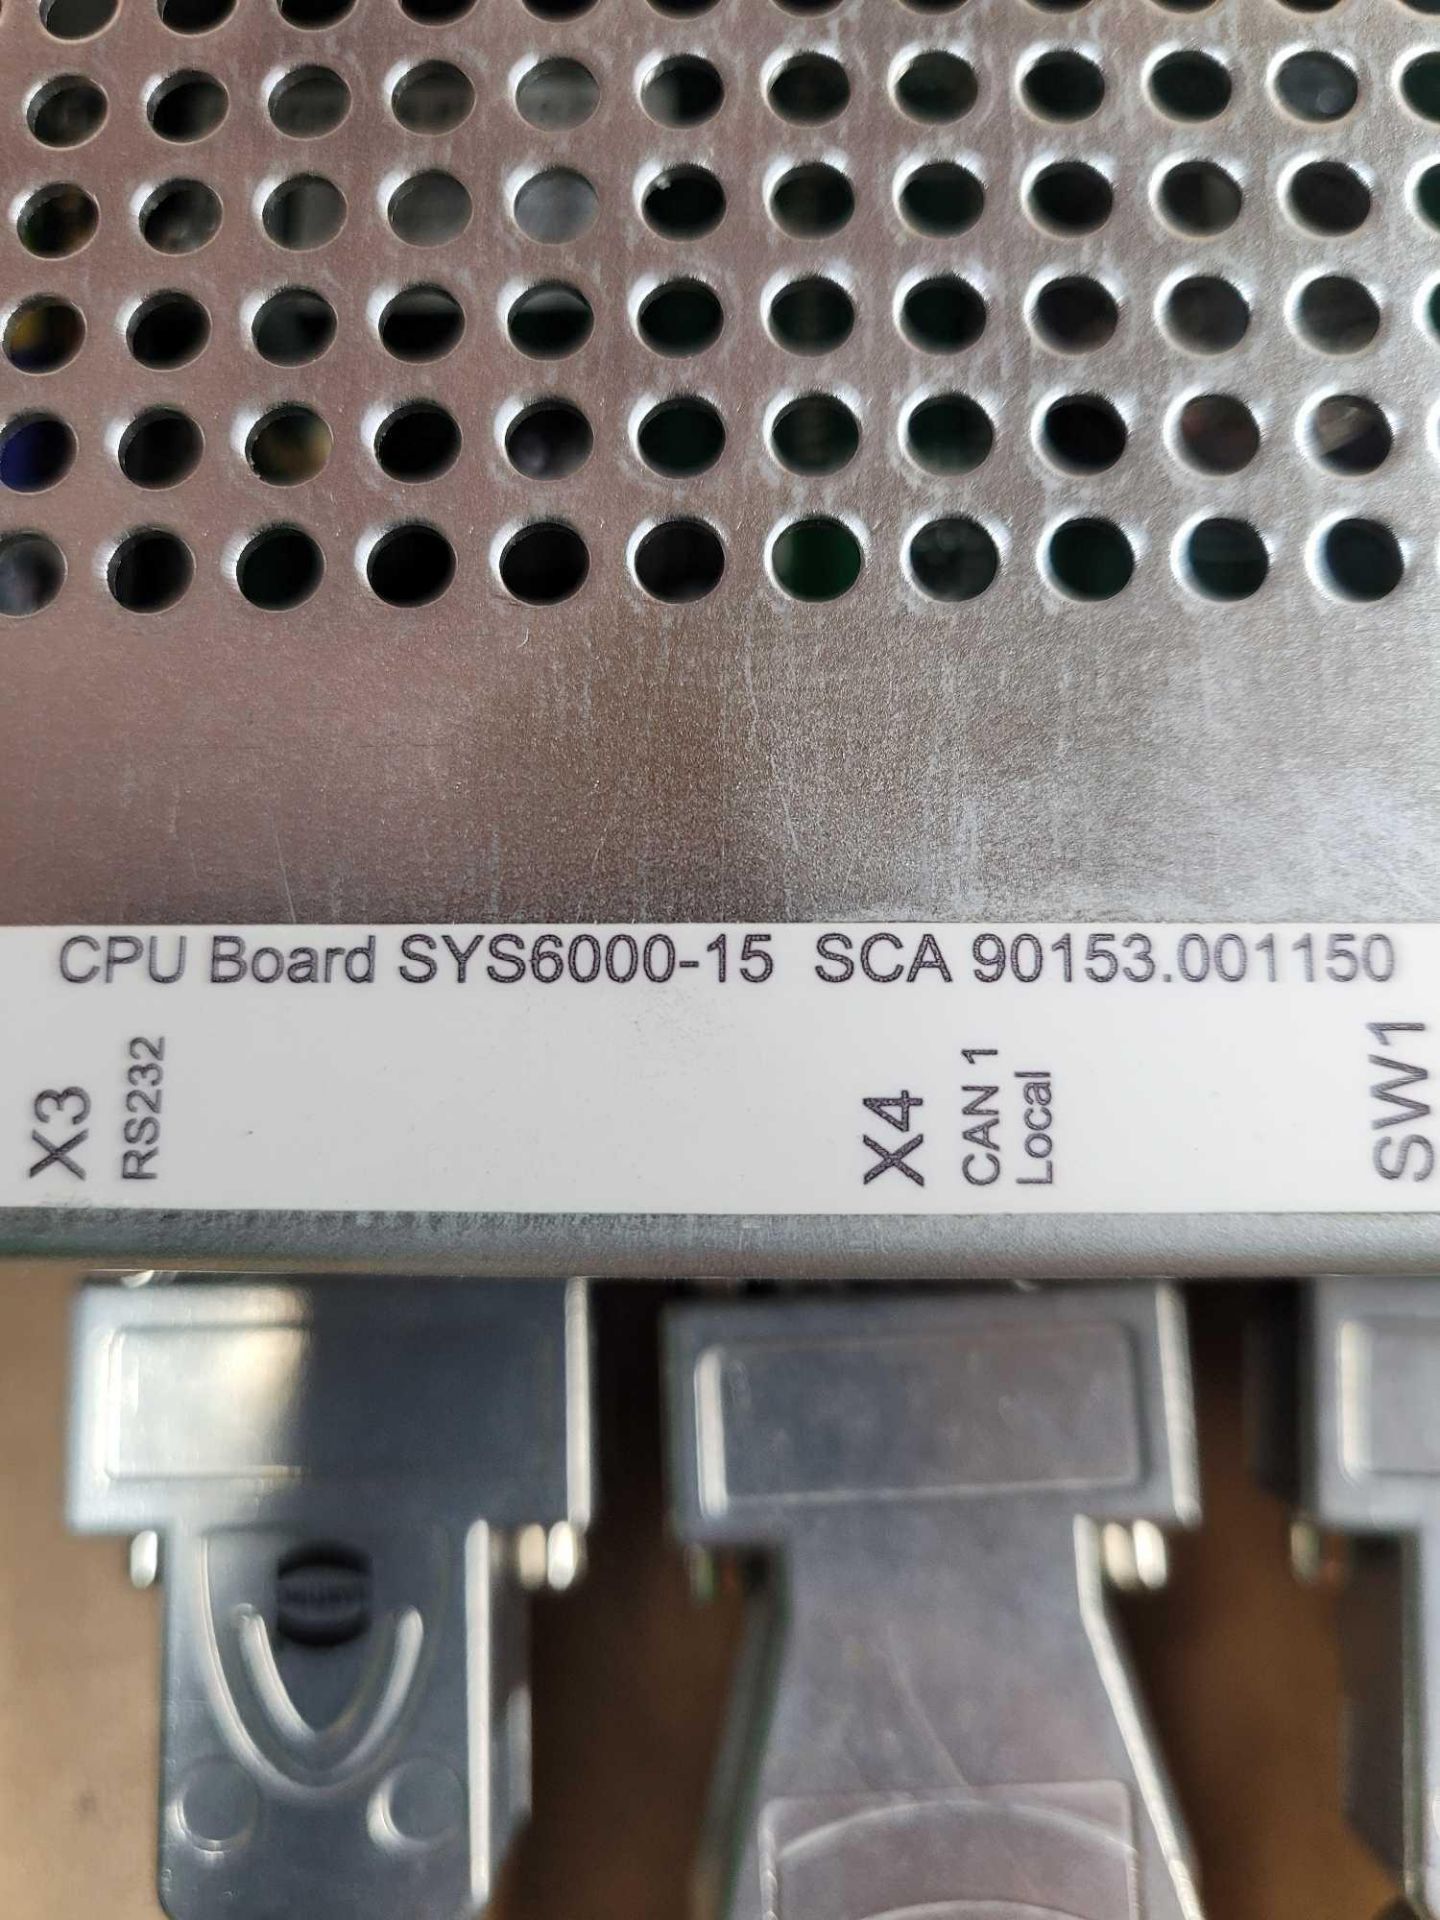 SCA 90153.001150 / SYS 6000-15 CPU Board HMS AB4582  /  Lot Weight: 2.4 lbs - Image 3 of 6